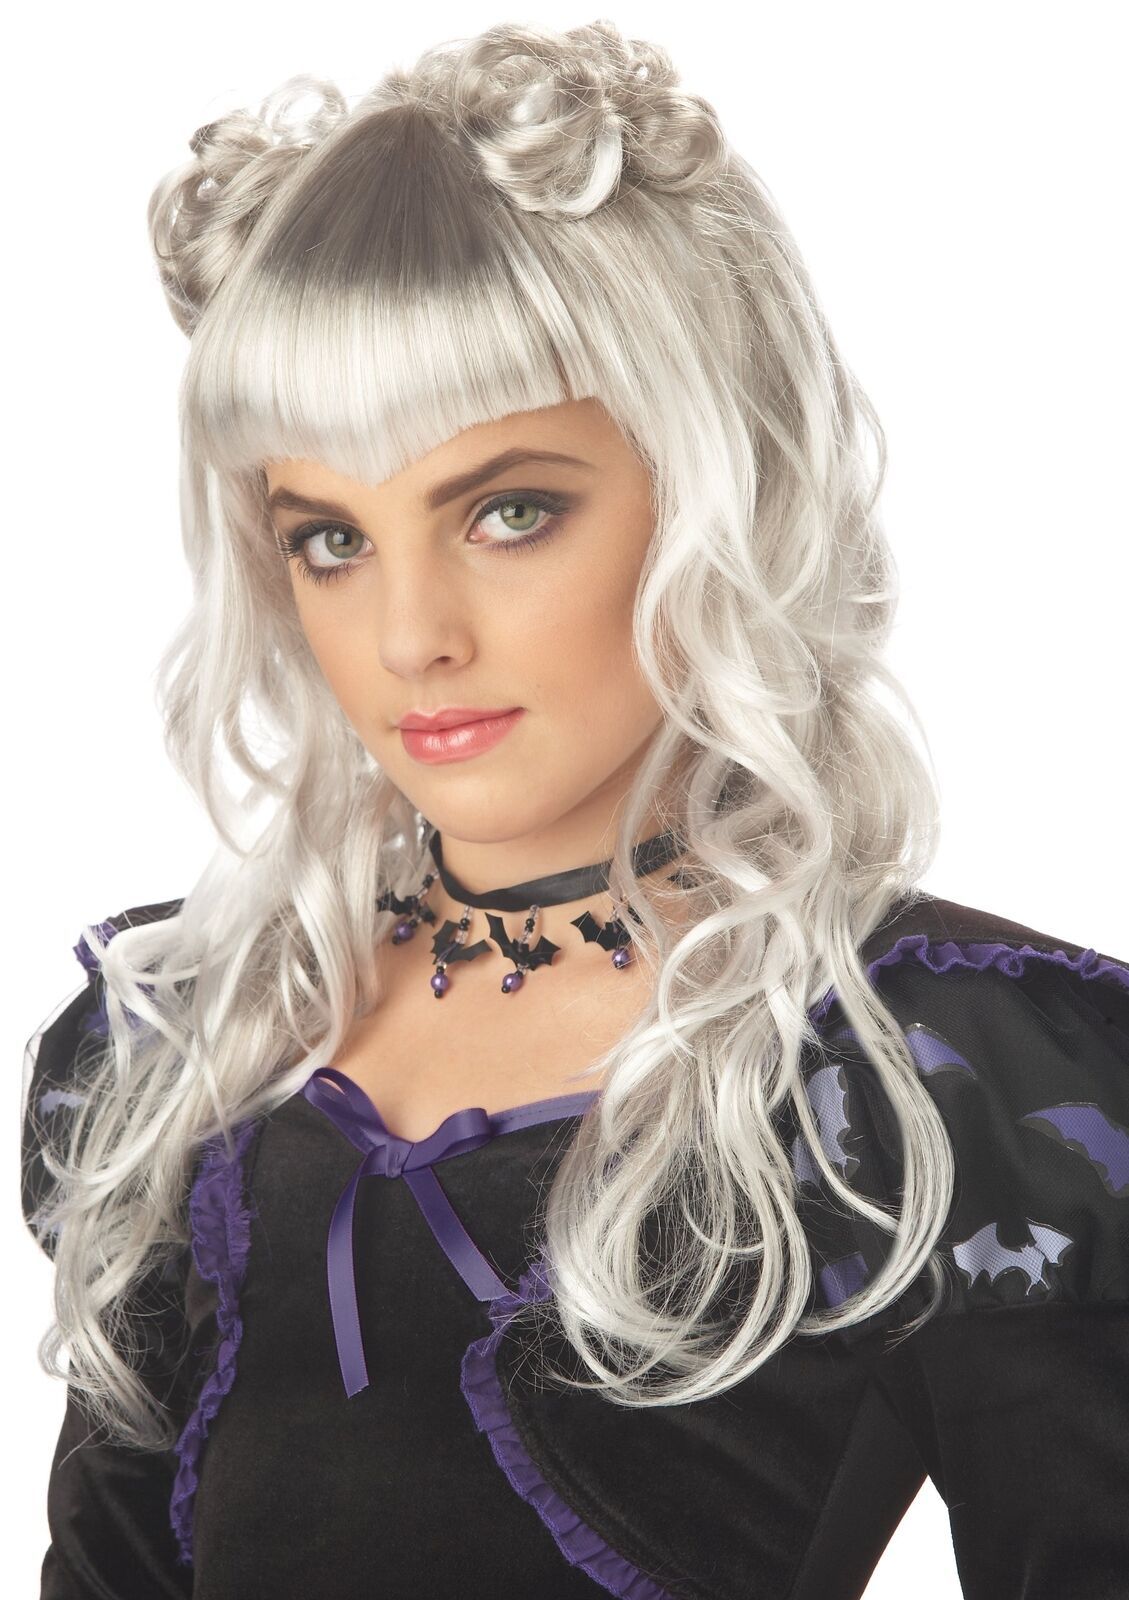 Primary image for California Costumes - Women's Moonlight Wig - Grey/Silver - Costume Accessory